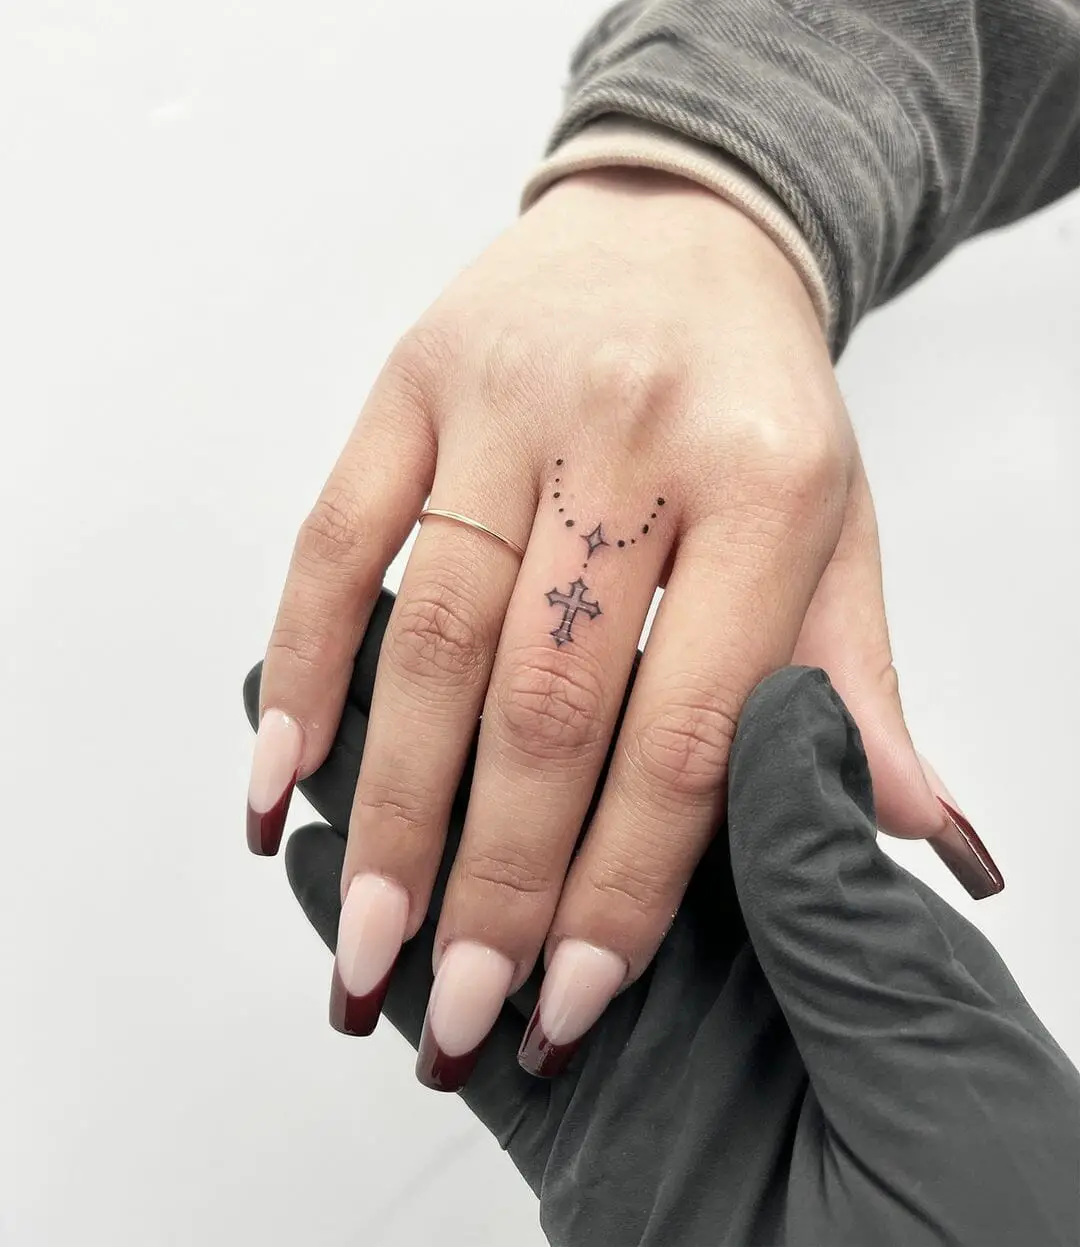 80 finger tattoos ideas for men and women to try in 2023 - Legit.ng